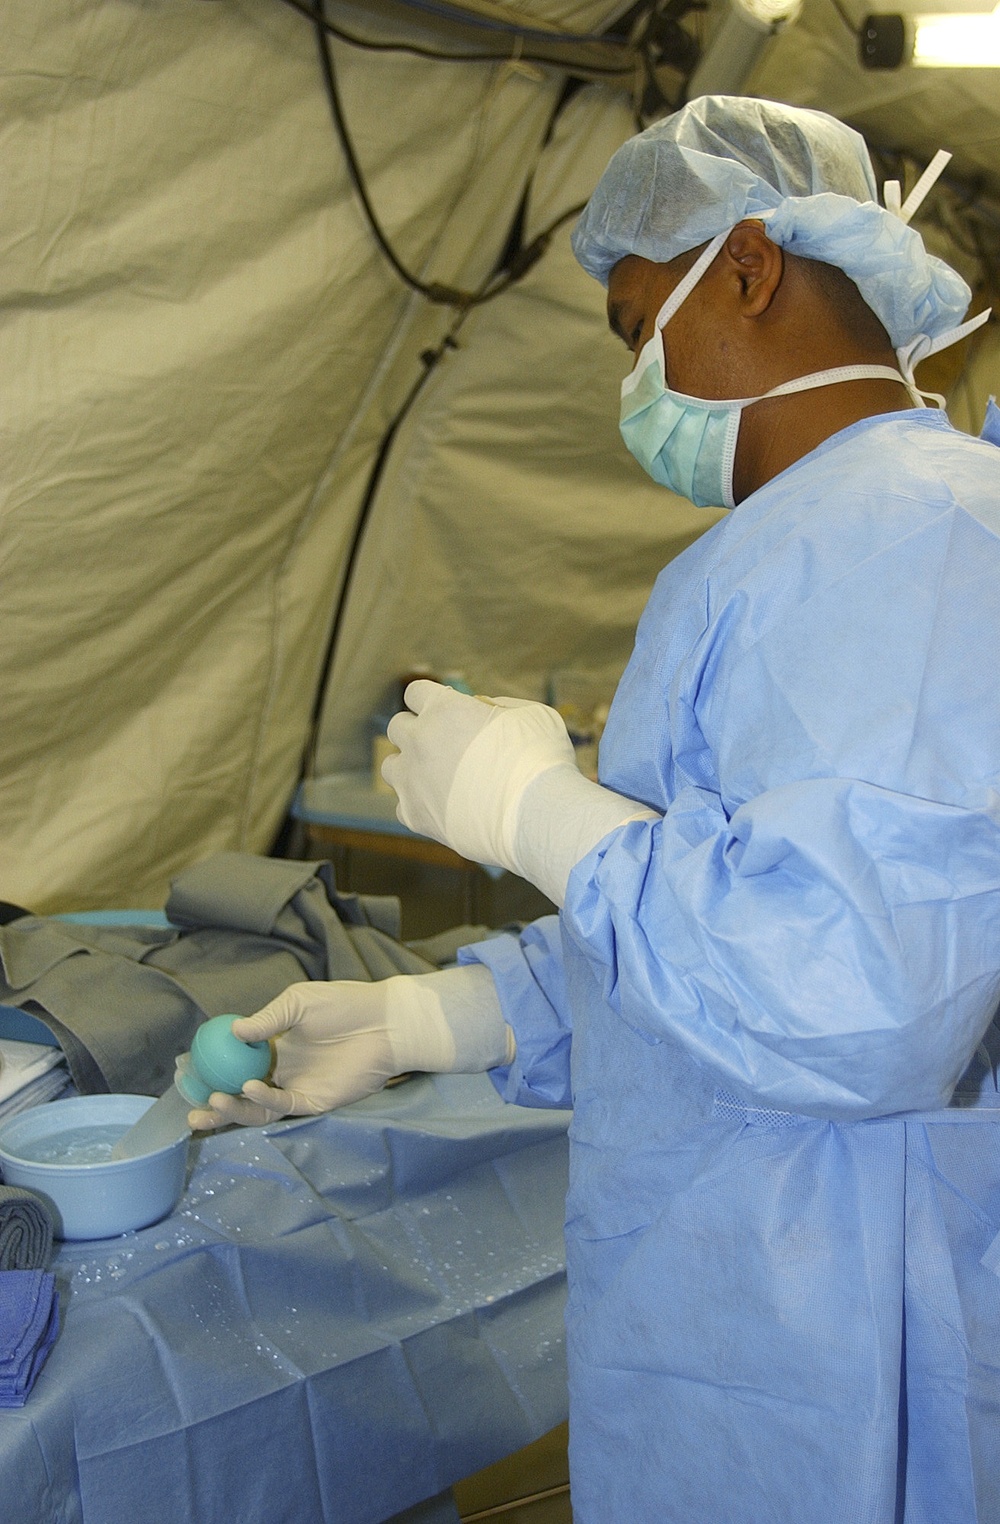 321st Expeditionary Medical Group activity